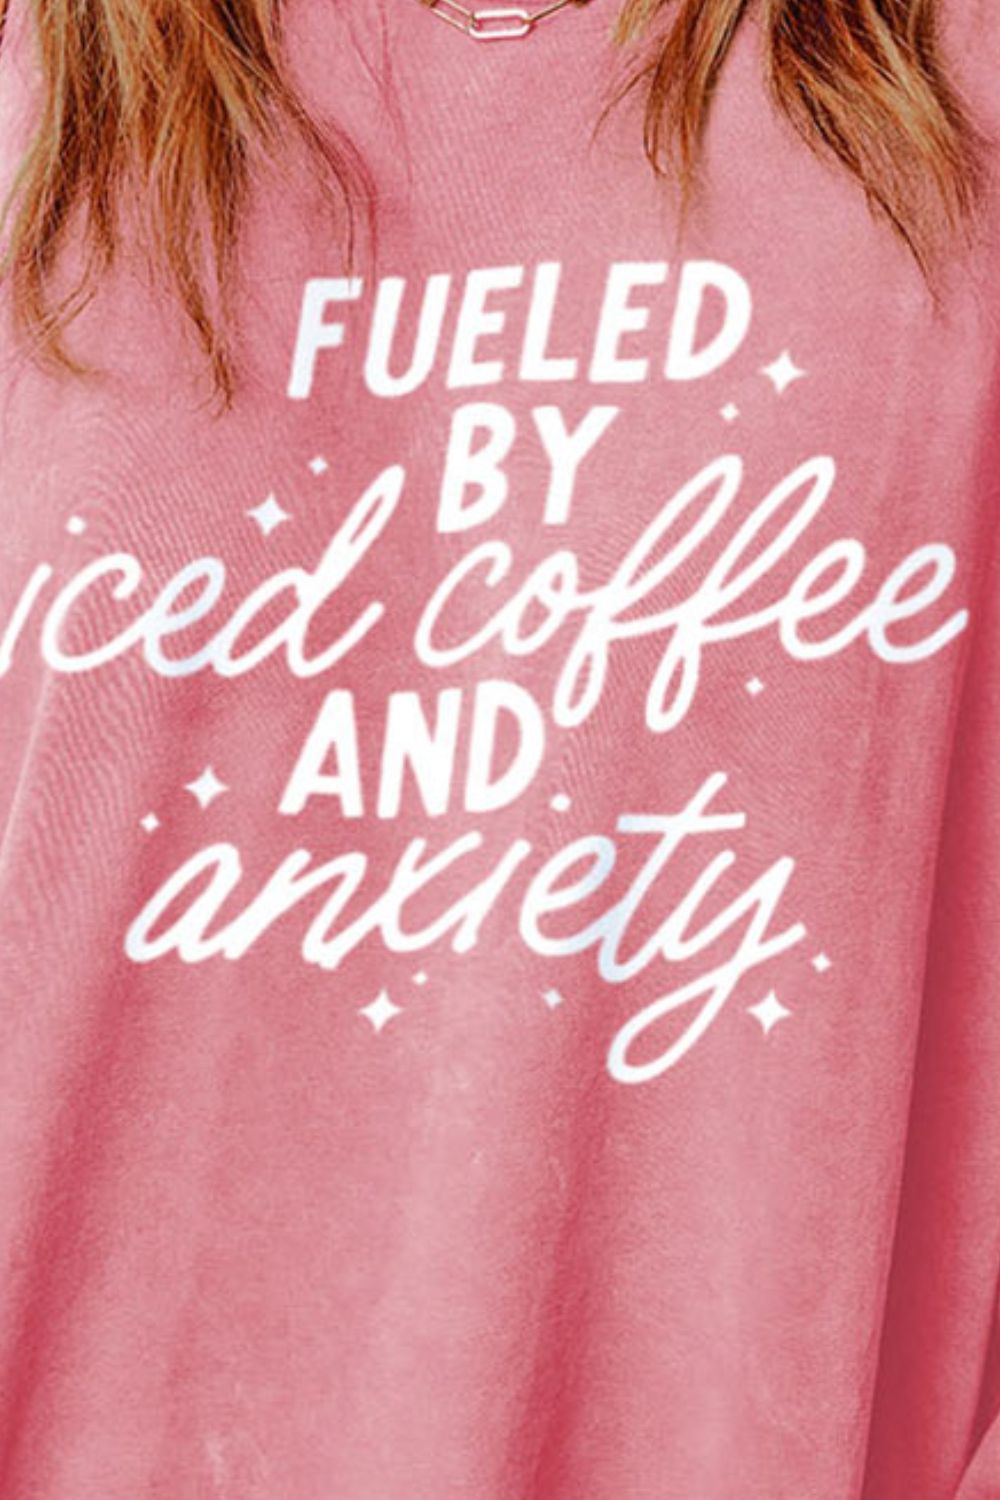 Fueled by Coffee and Anxiety Graphic Sweatshirt - Cheeky Chic Boutique